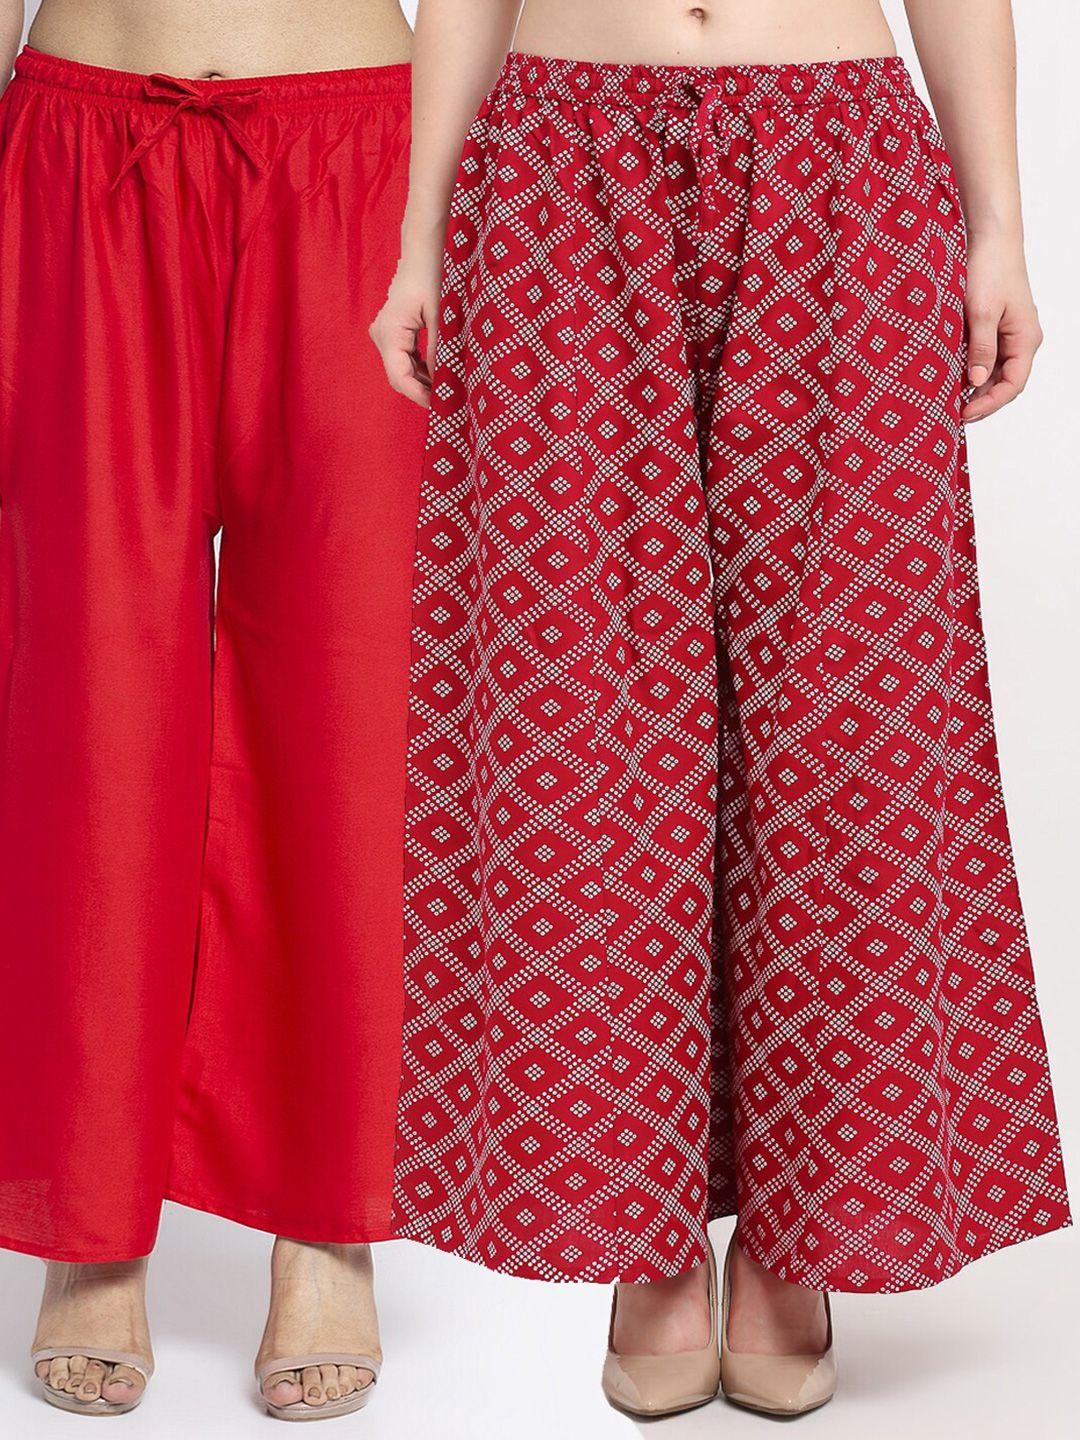 gracit women red & white pack of 2 knitted ethnic palazzos